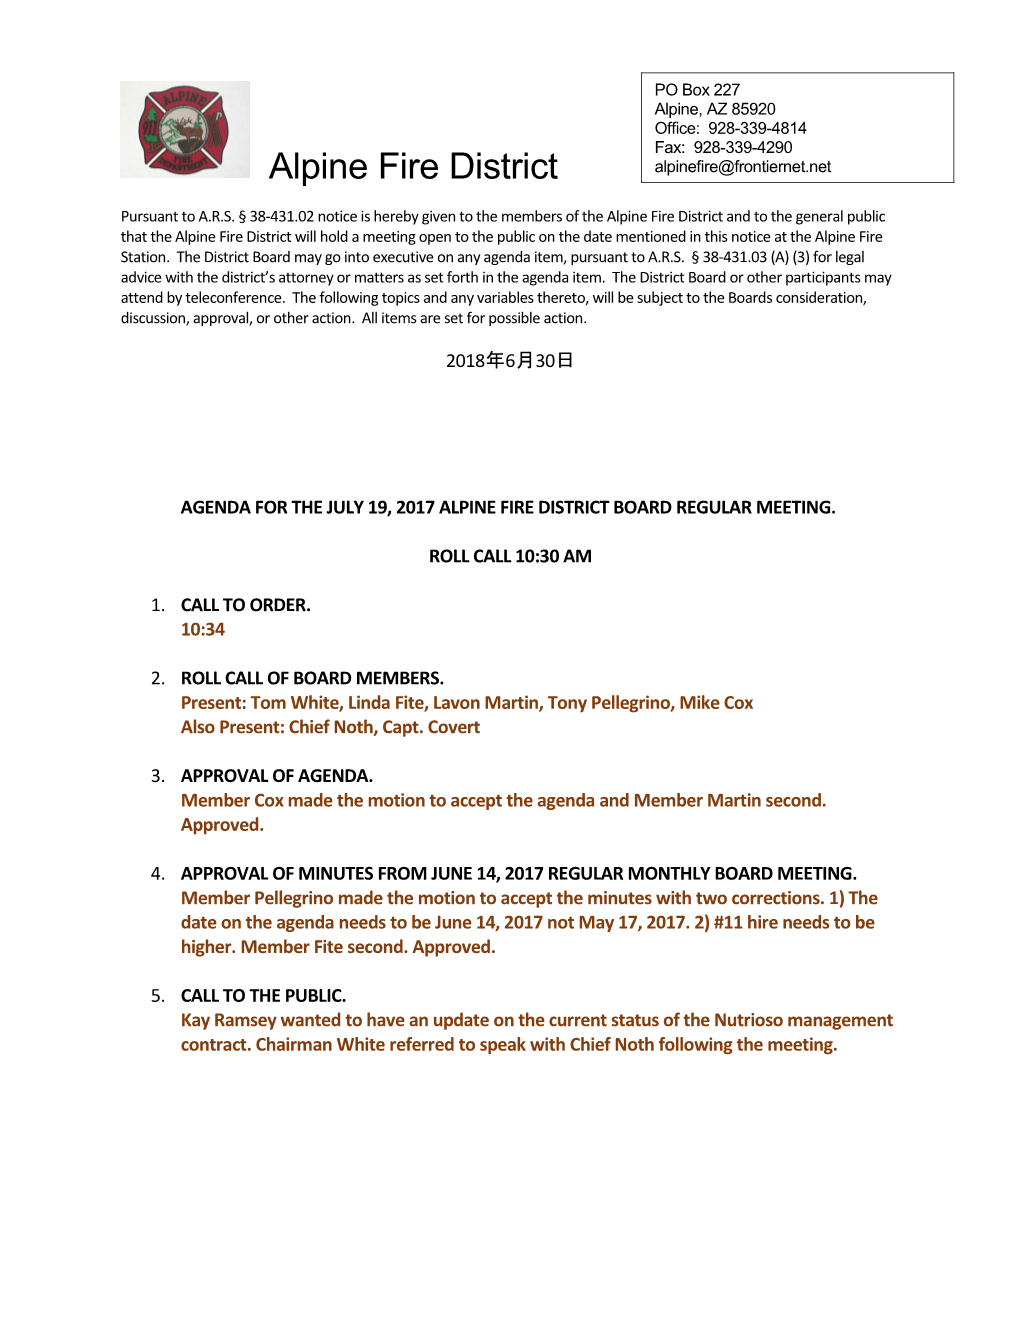 Agenda for the July 19, 2017 Alpine Fire District Board Regular Meeting